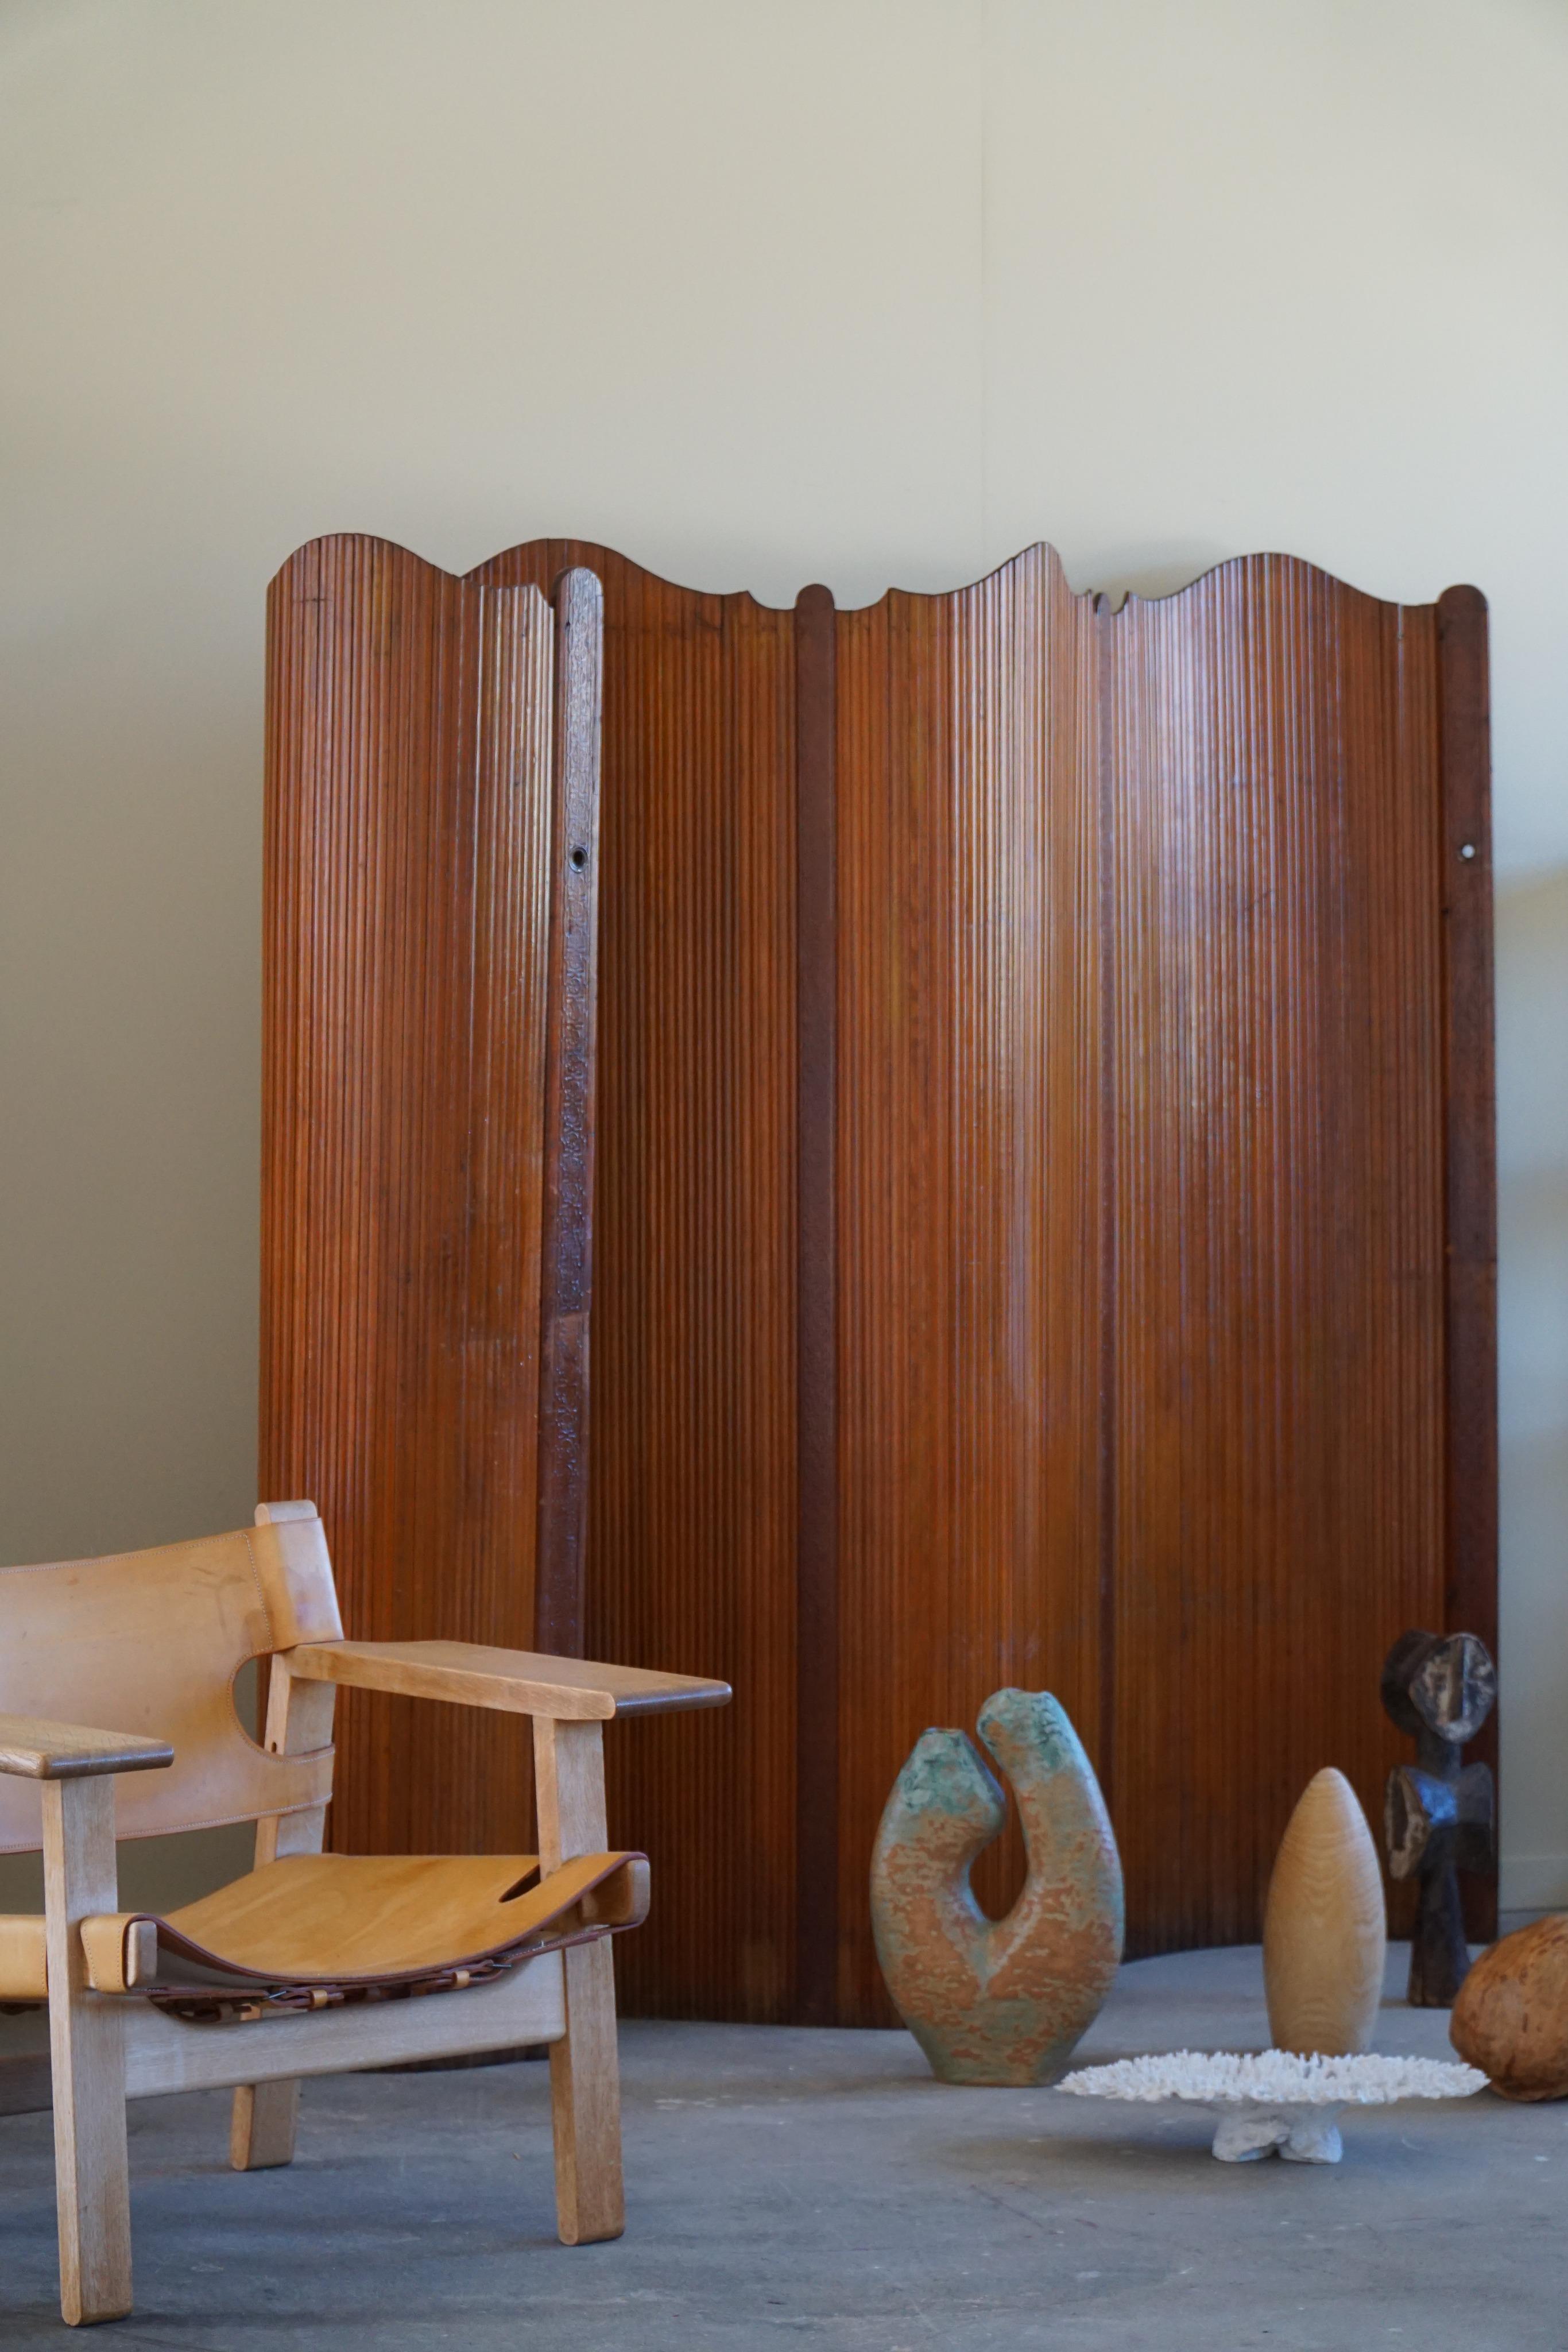 This Art Deco room divider is a masterpiece of design and craftsmanship, standing tall and commanding attention with its sleek and streamlined form. The patinated pine wood is rich in color, with deep brown tones that provide a warm and inviting